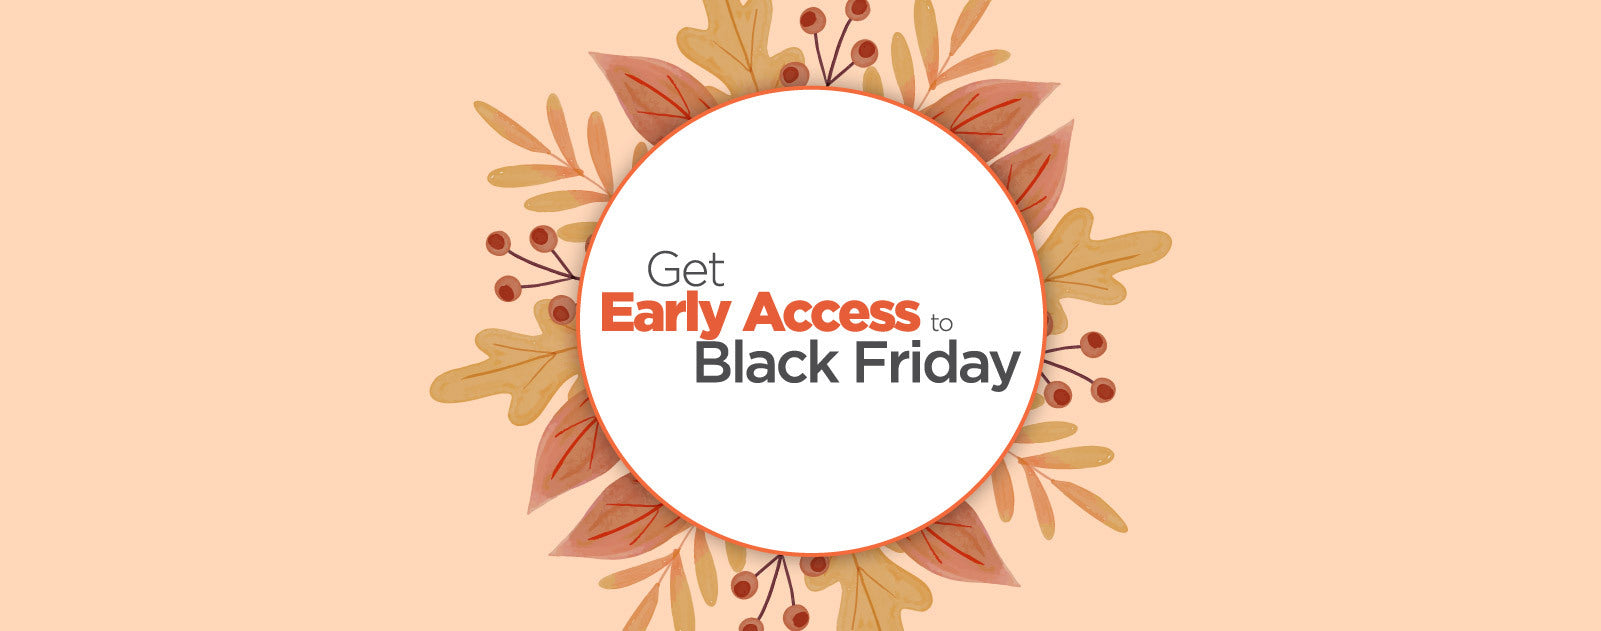 Get Early Access to Black Friday Deals